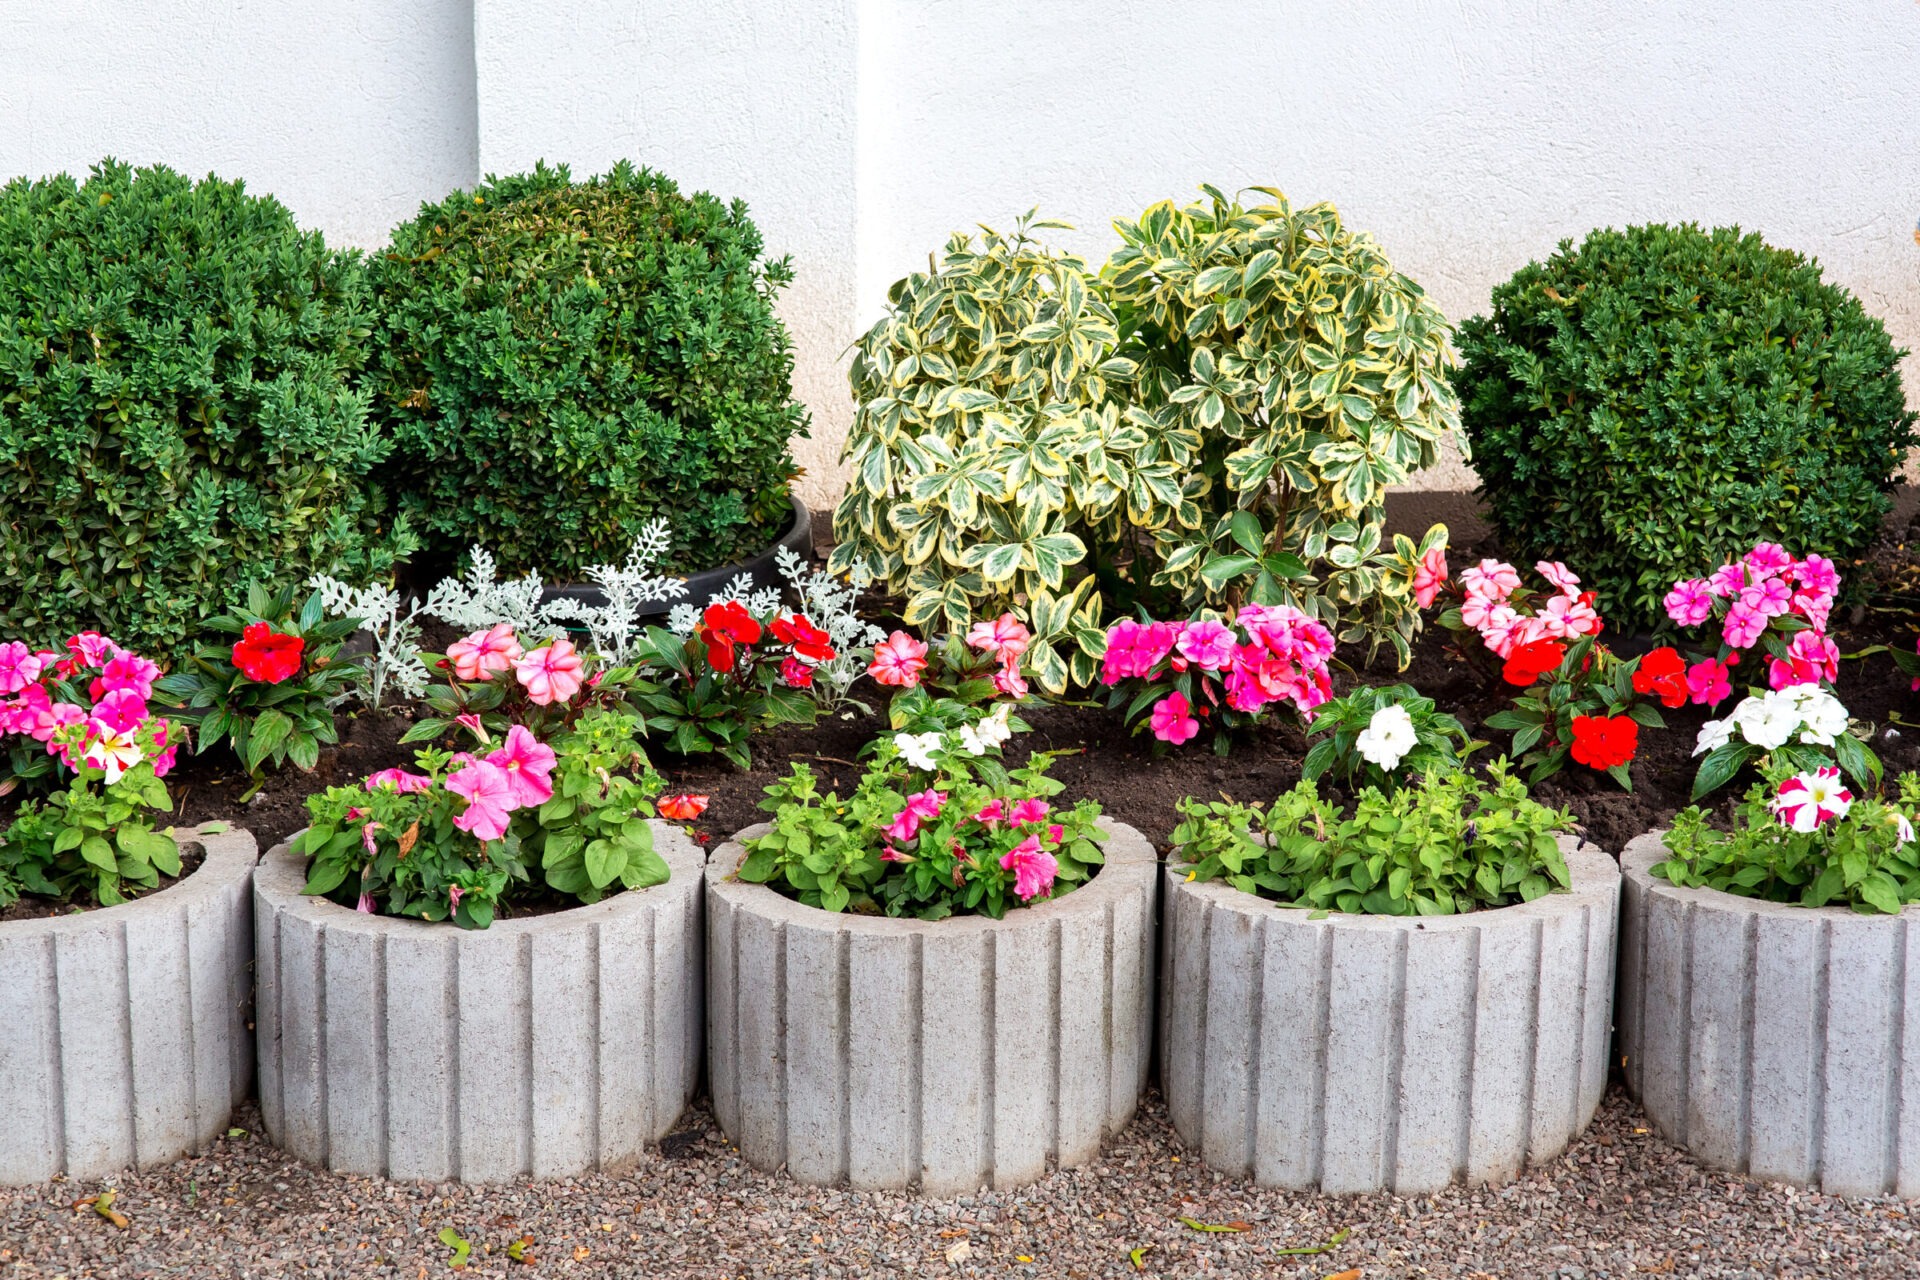 The image shows a neat garden with colorful flowers in concrete planter rings and shrubs against a white wall, symbolizing organized outdoor design.